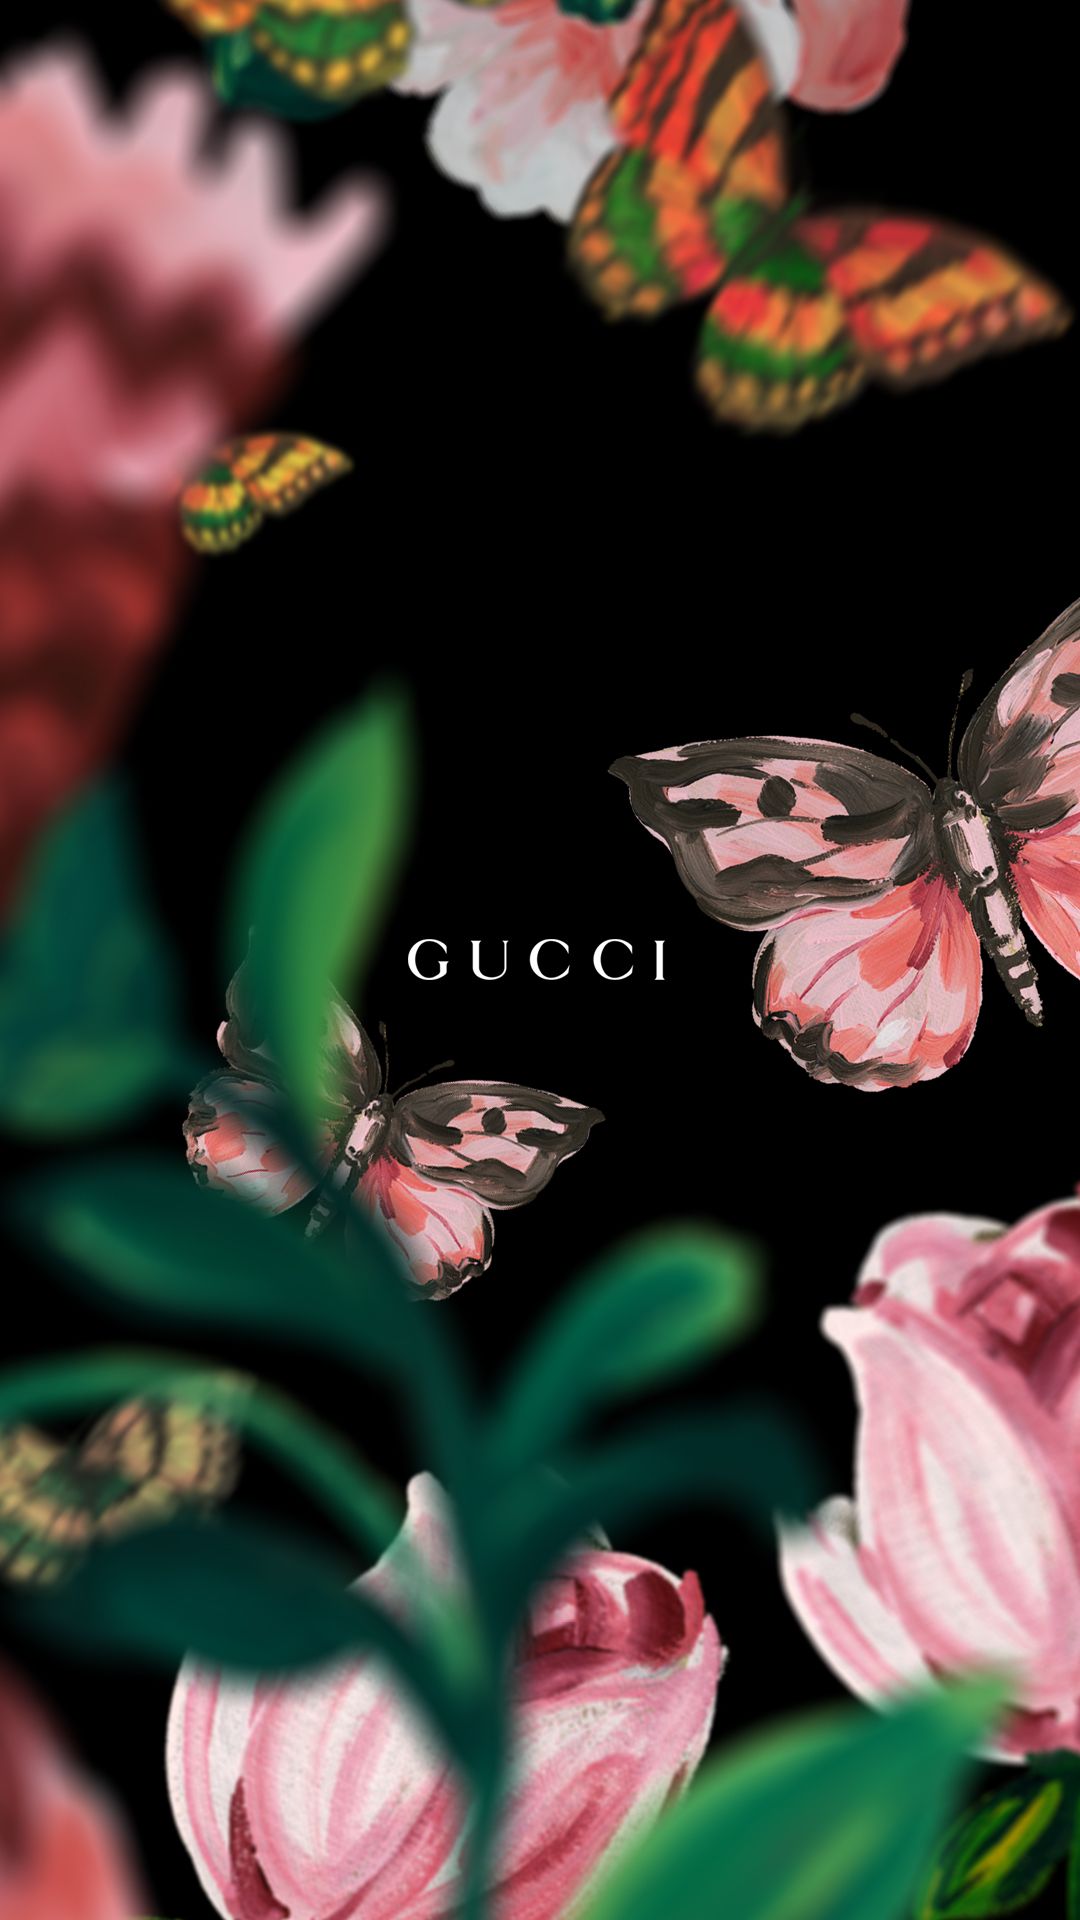 Gucci HD Wallpapers Free download 